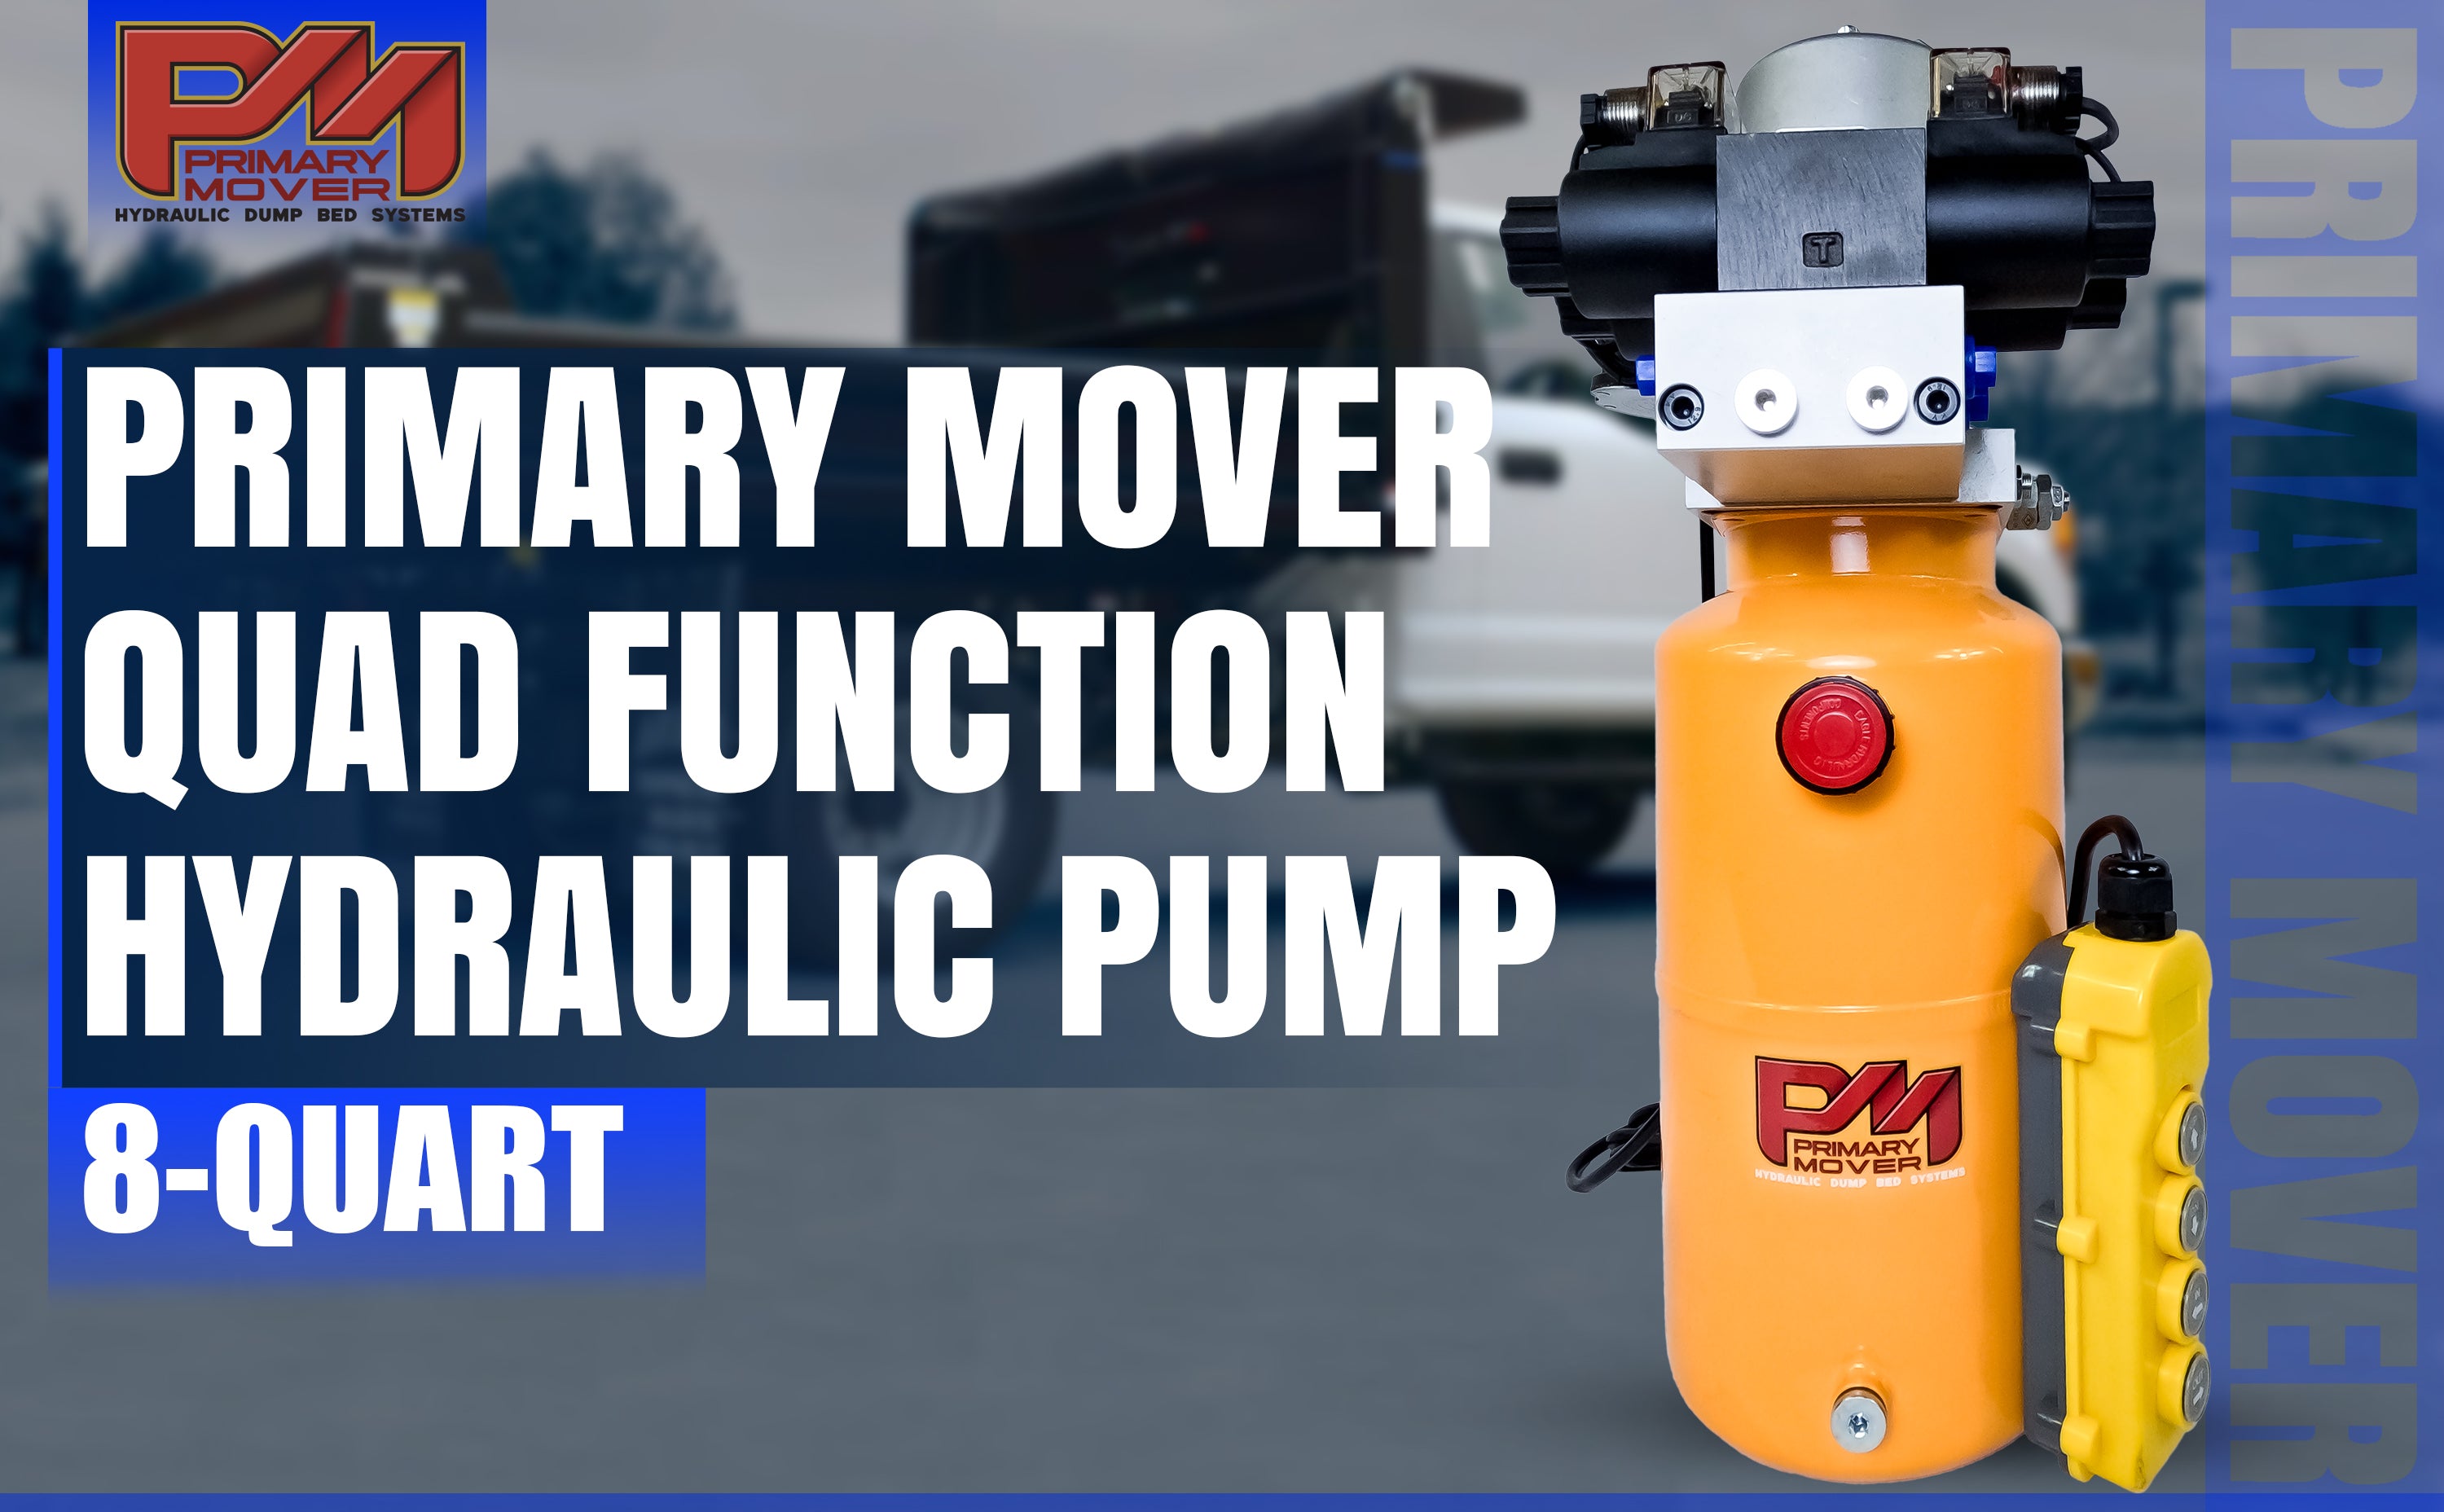 Primary Mover 12V Dual Double-Acting Hydraulic Power Unit: Compact, efficient solution for dump trailers and trucks, enabling four hydraulic actions simultaneously. Built for durability and versatile applications. Used for any truck or trailer application